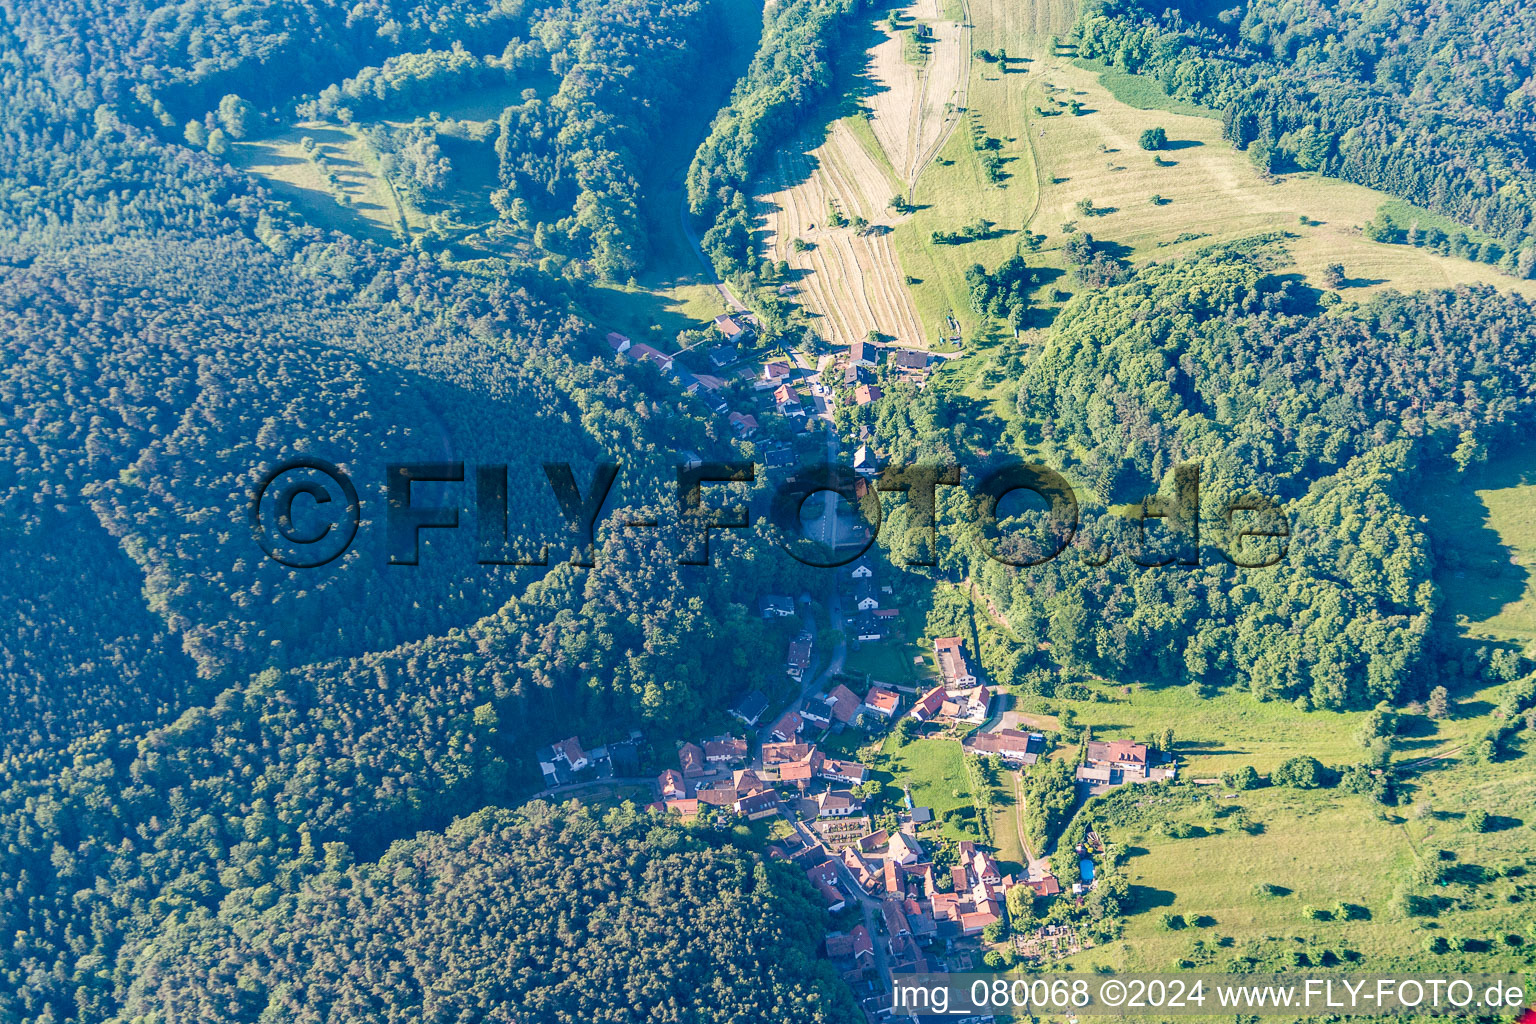 Drone image of Blankenborn in the state Rhineland-Palatinate, Germany